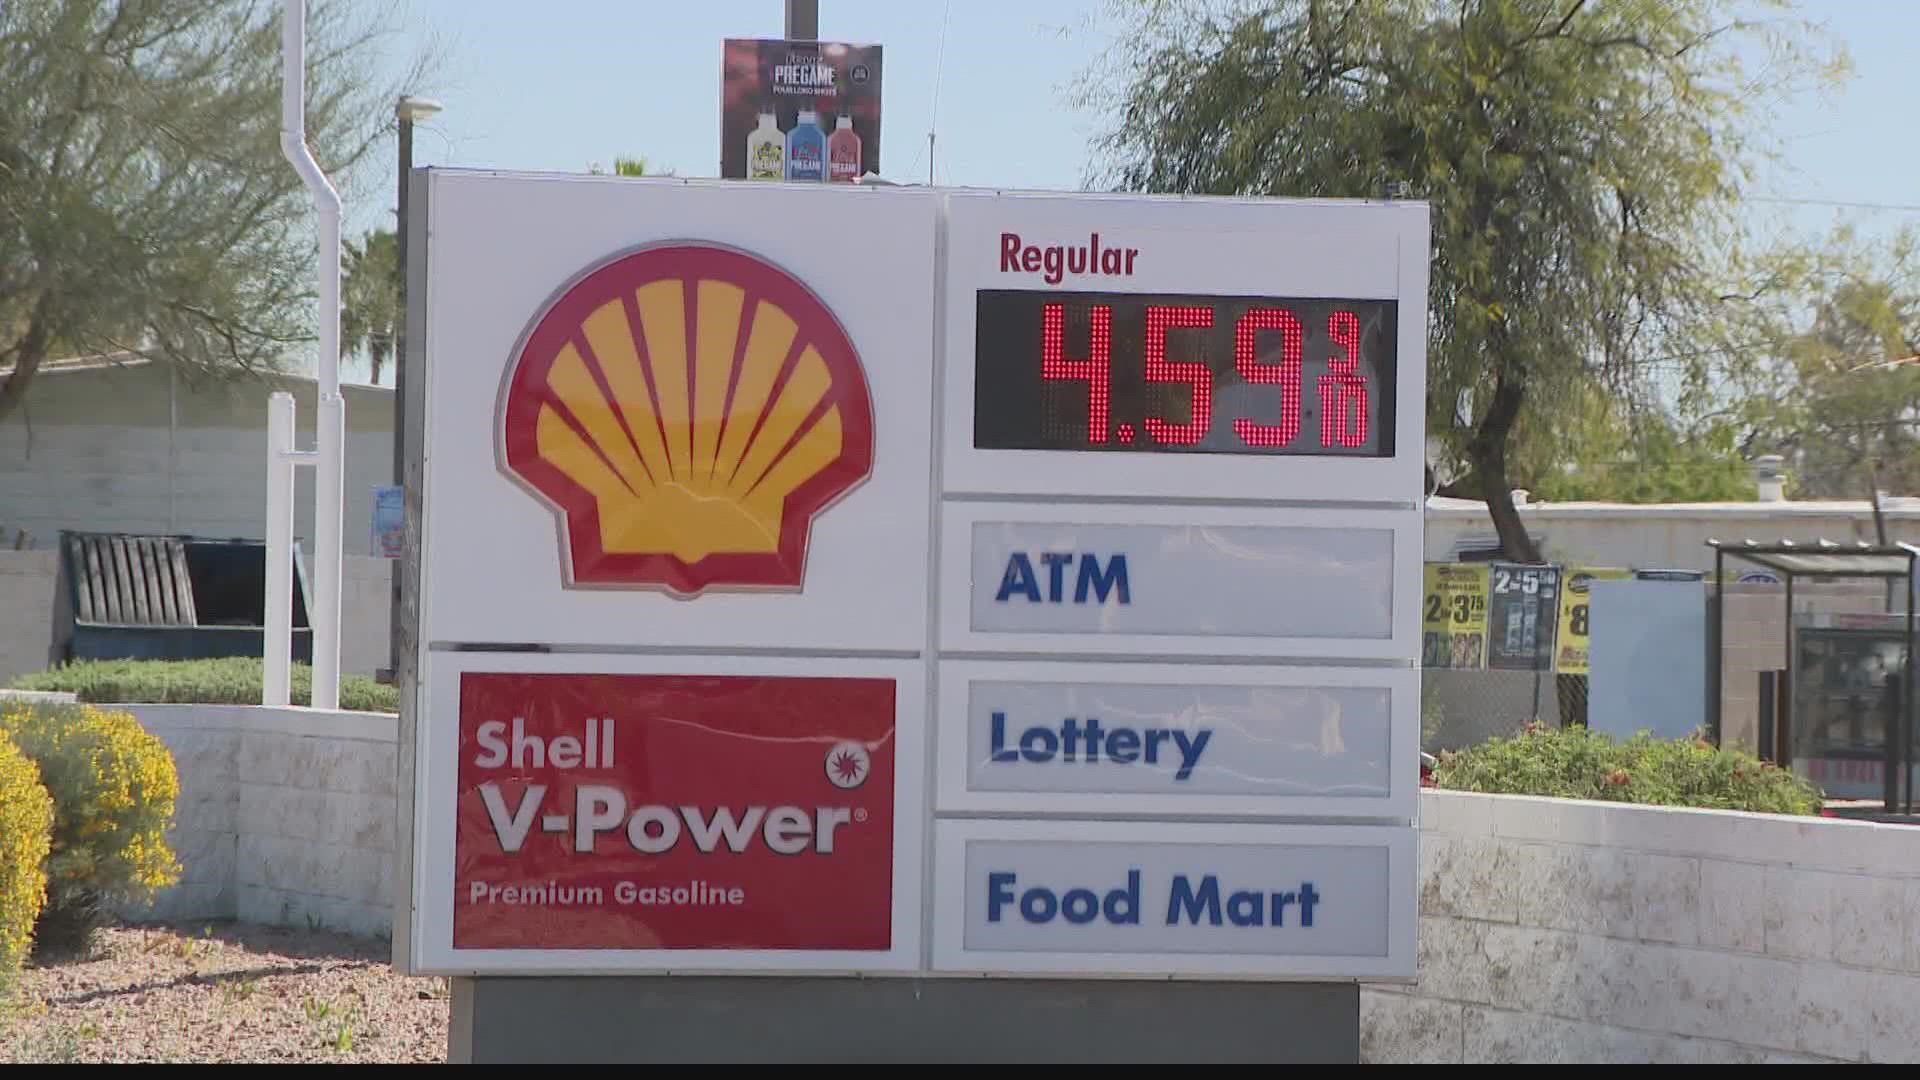 With gas prices averaging $5 per gallon of regular, many families are putting the brakes on road trips and other gas-dependent travel plans.